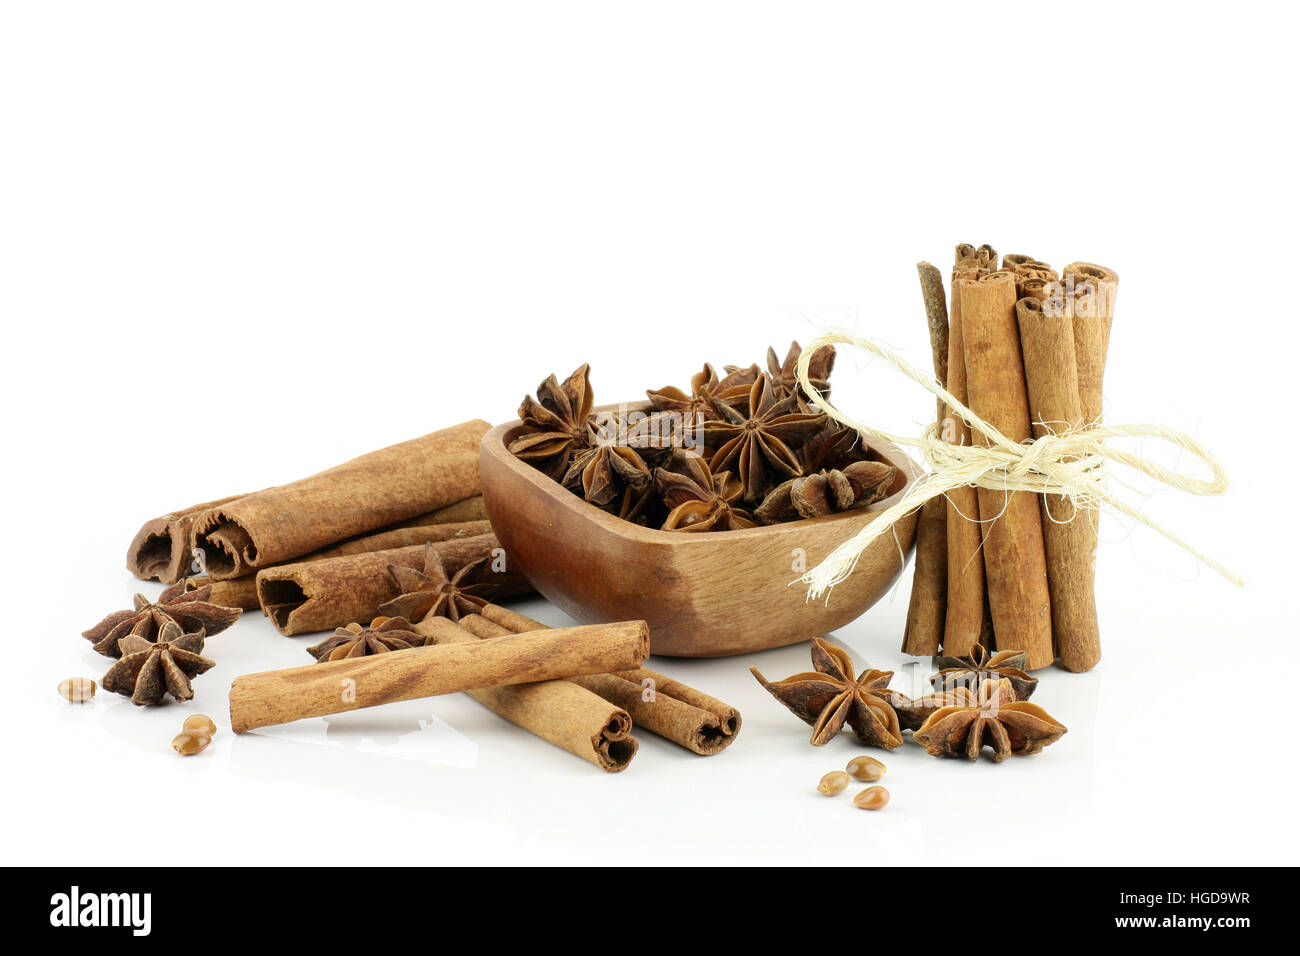 Star anise in a wooden bowl with cinnamon sticks. Stock Photo